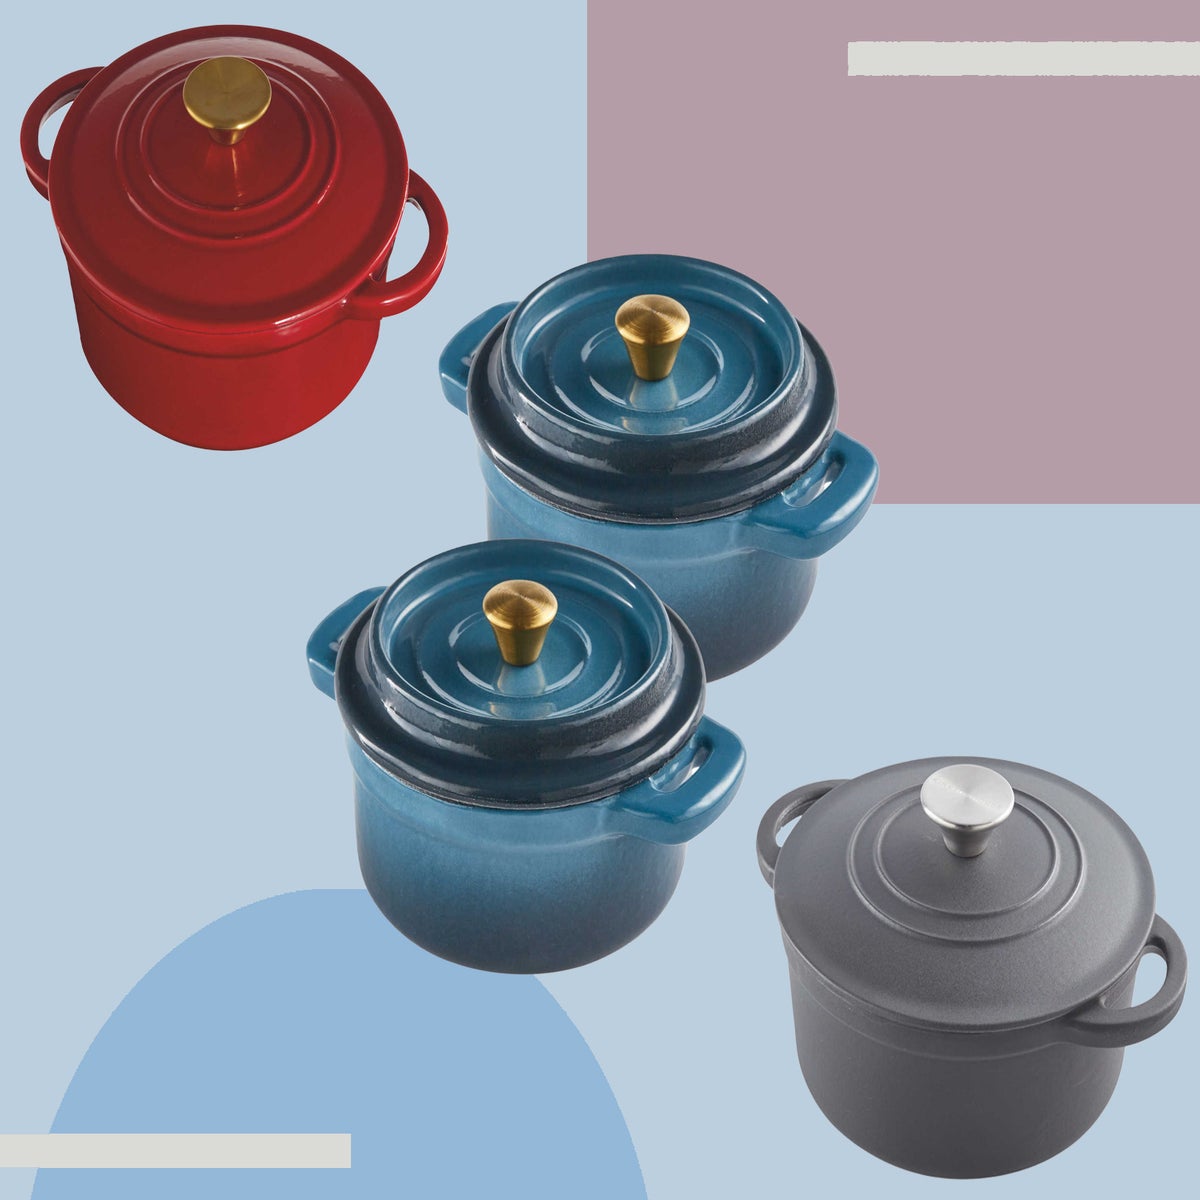 Aldi's Le Creuset dupe range a for a 35% discount right now | The Independent